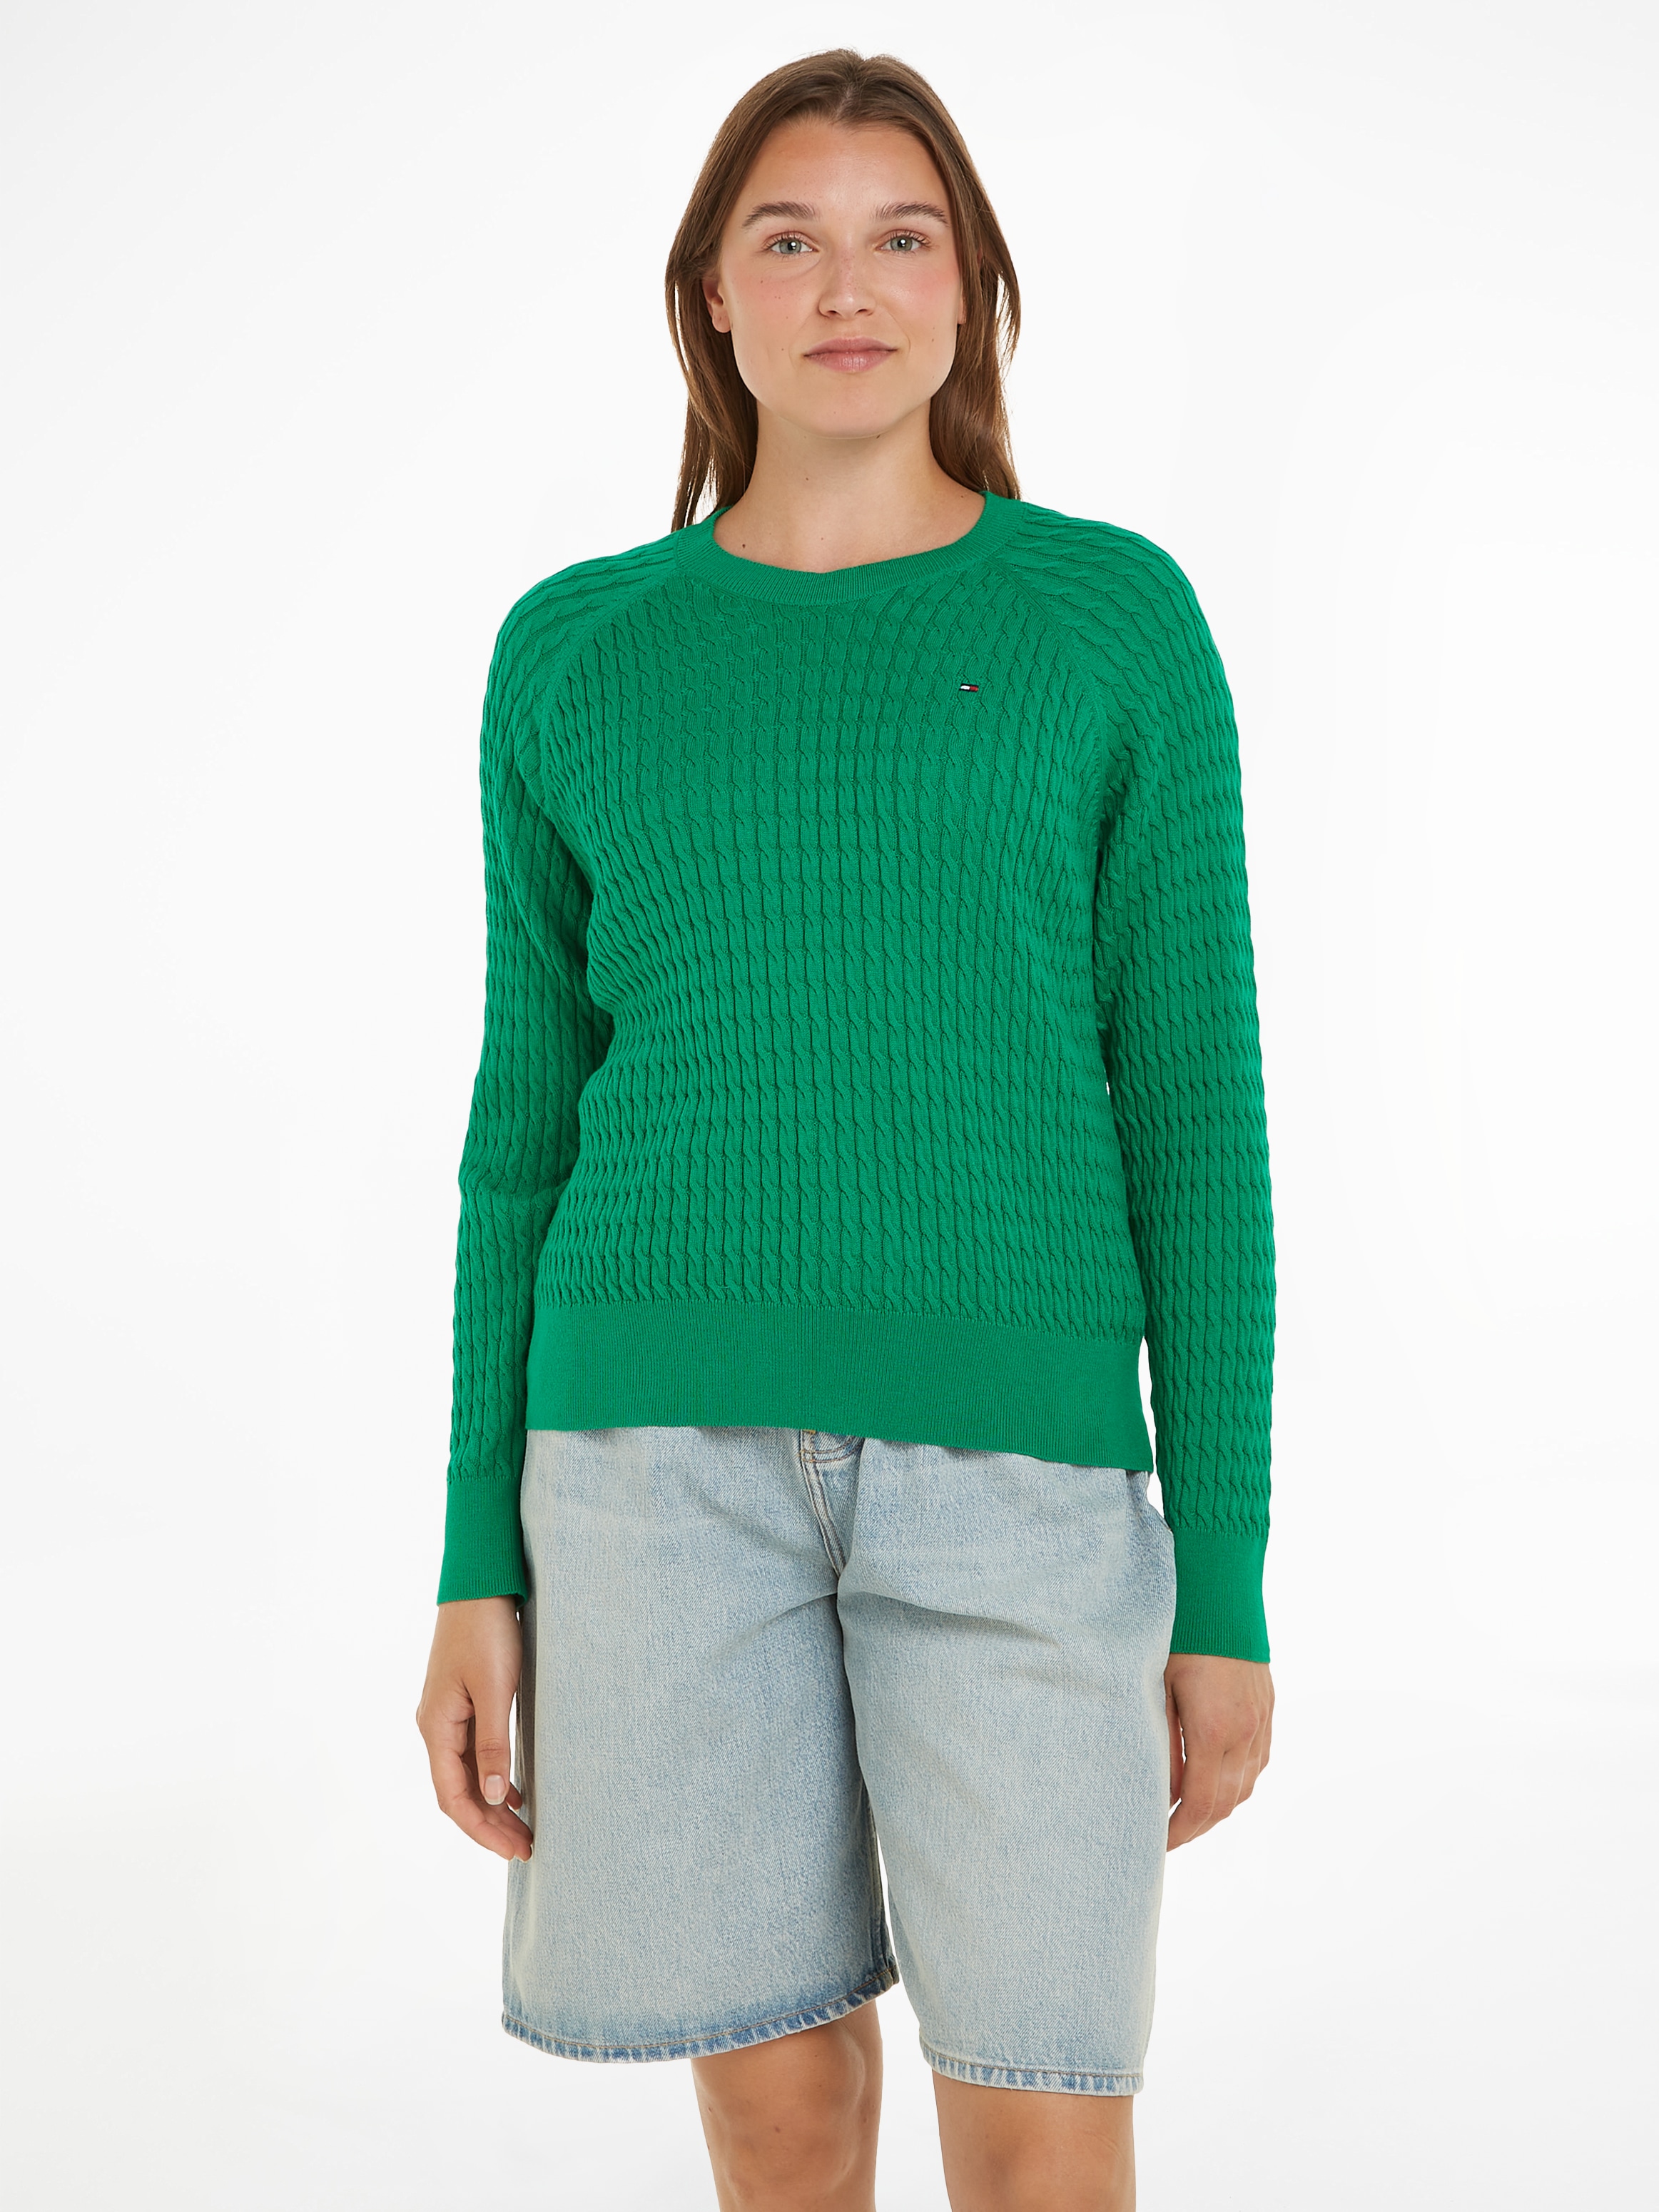 Rundhalspullover »CO CABLE C-NK SWEATER«, mit Zopfmuster